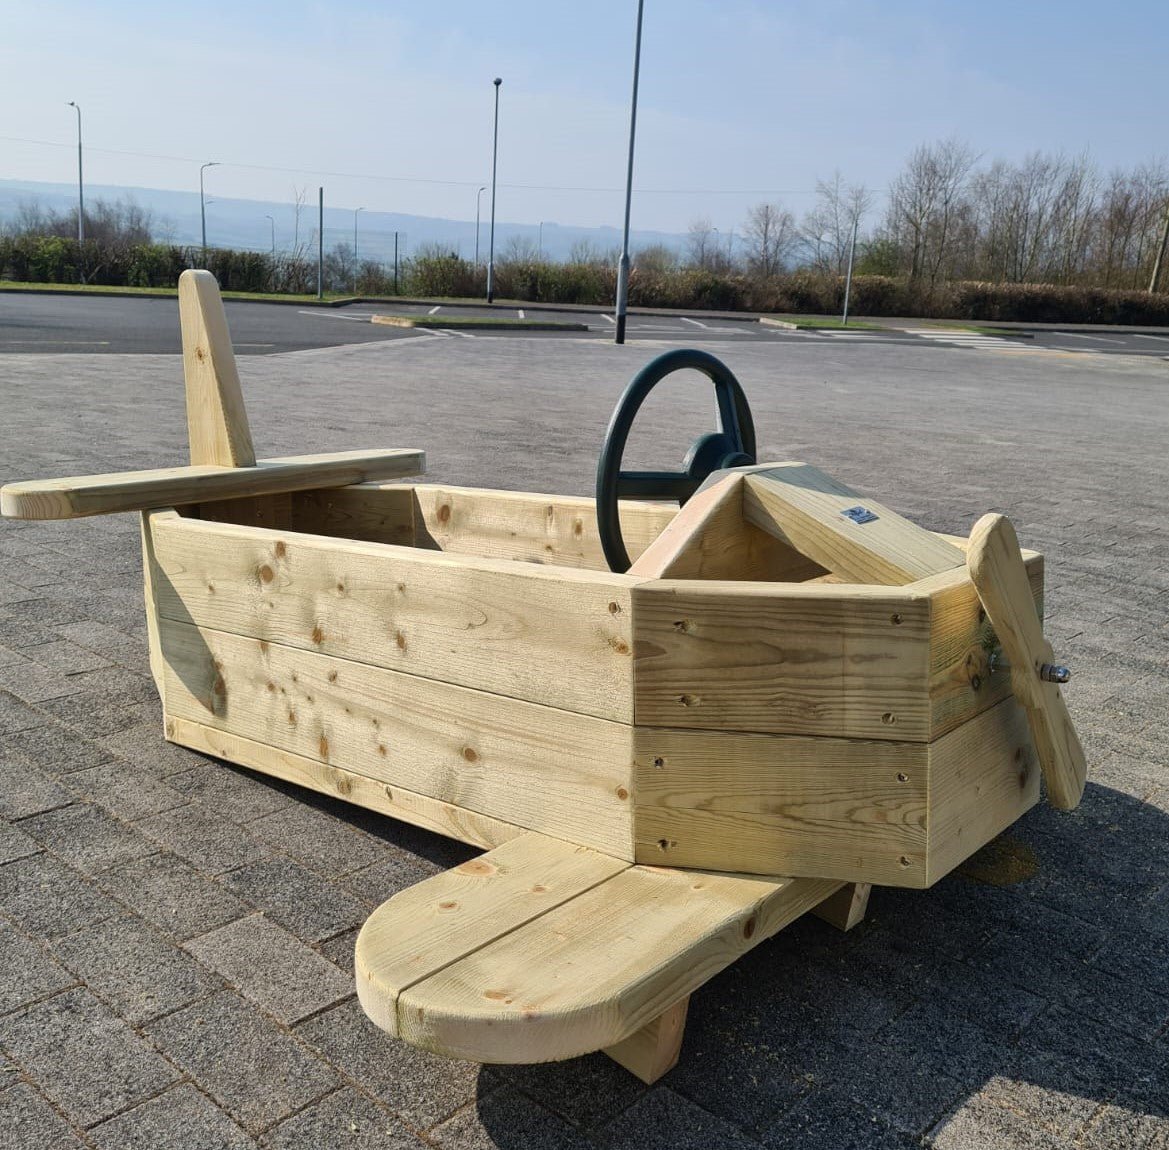 Aeroplane Outdoor Equipment | Learning and Exploring Through Play